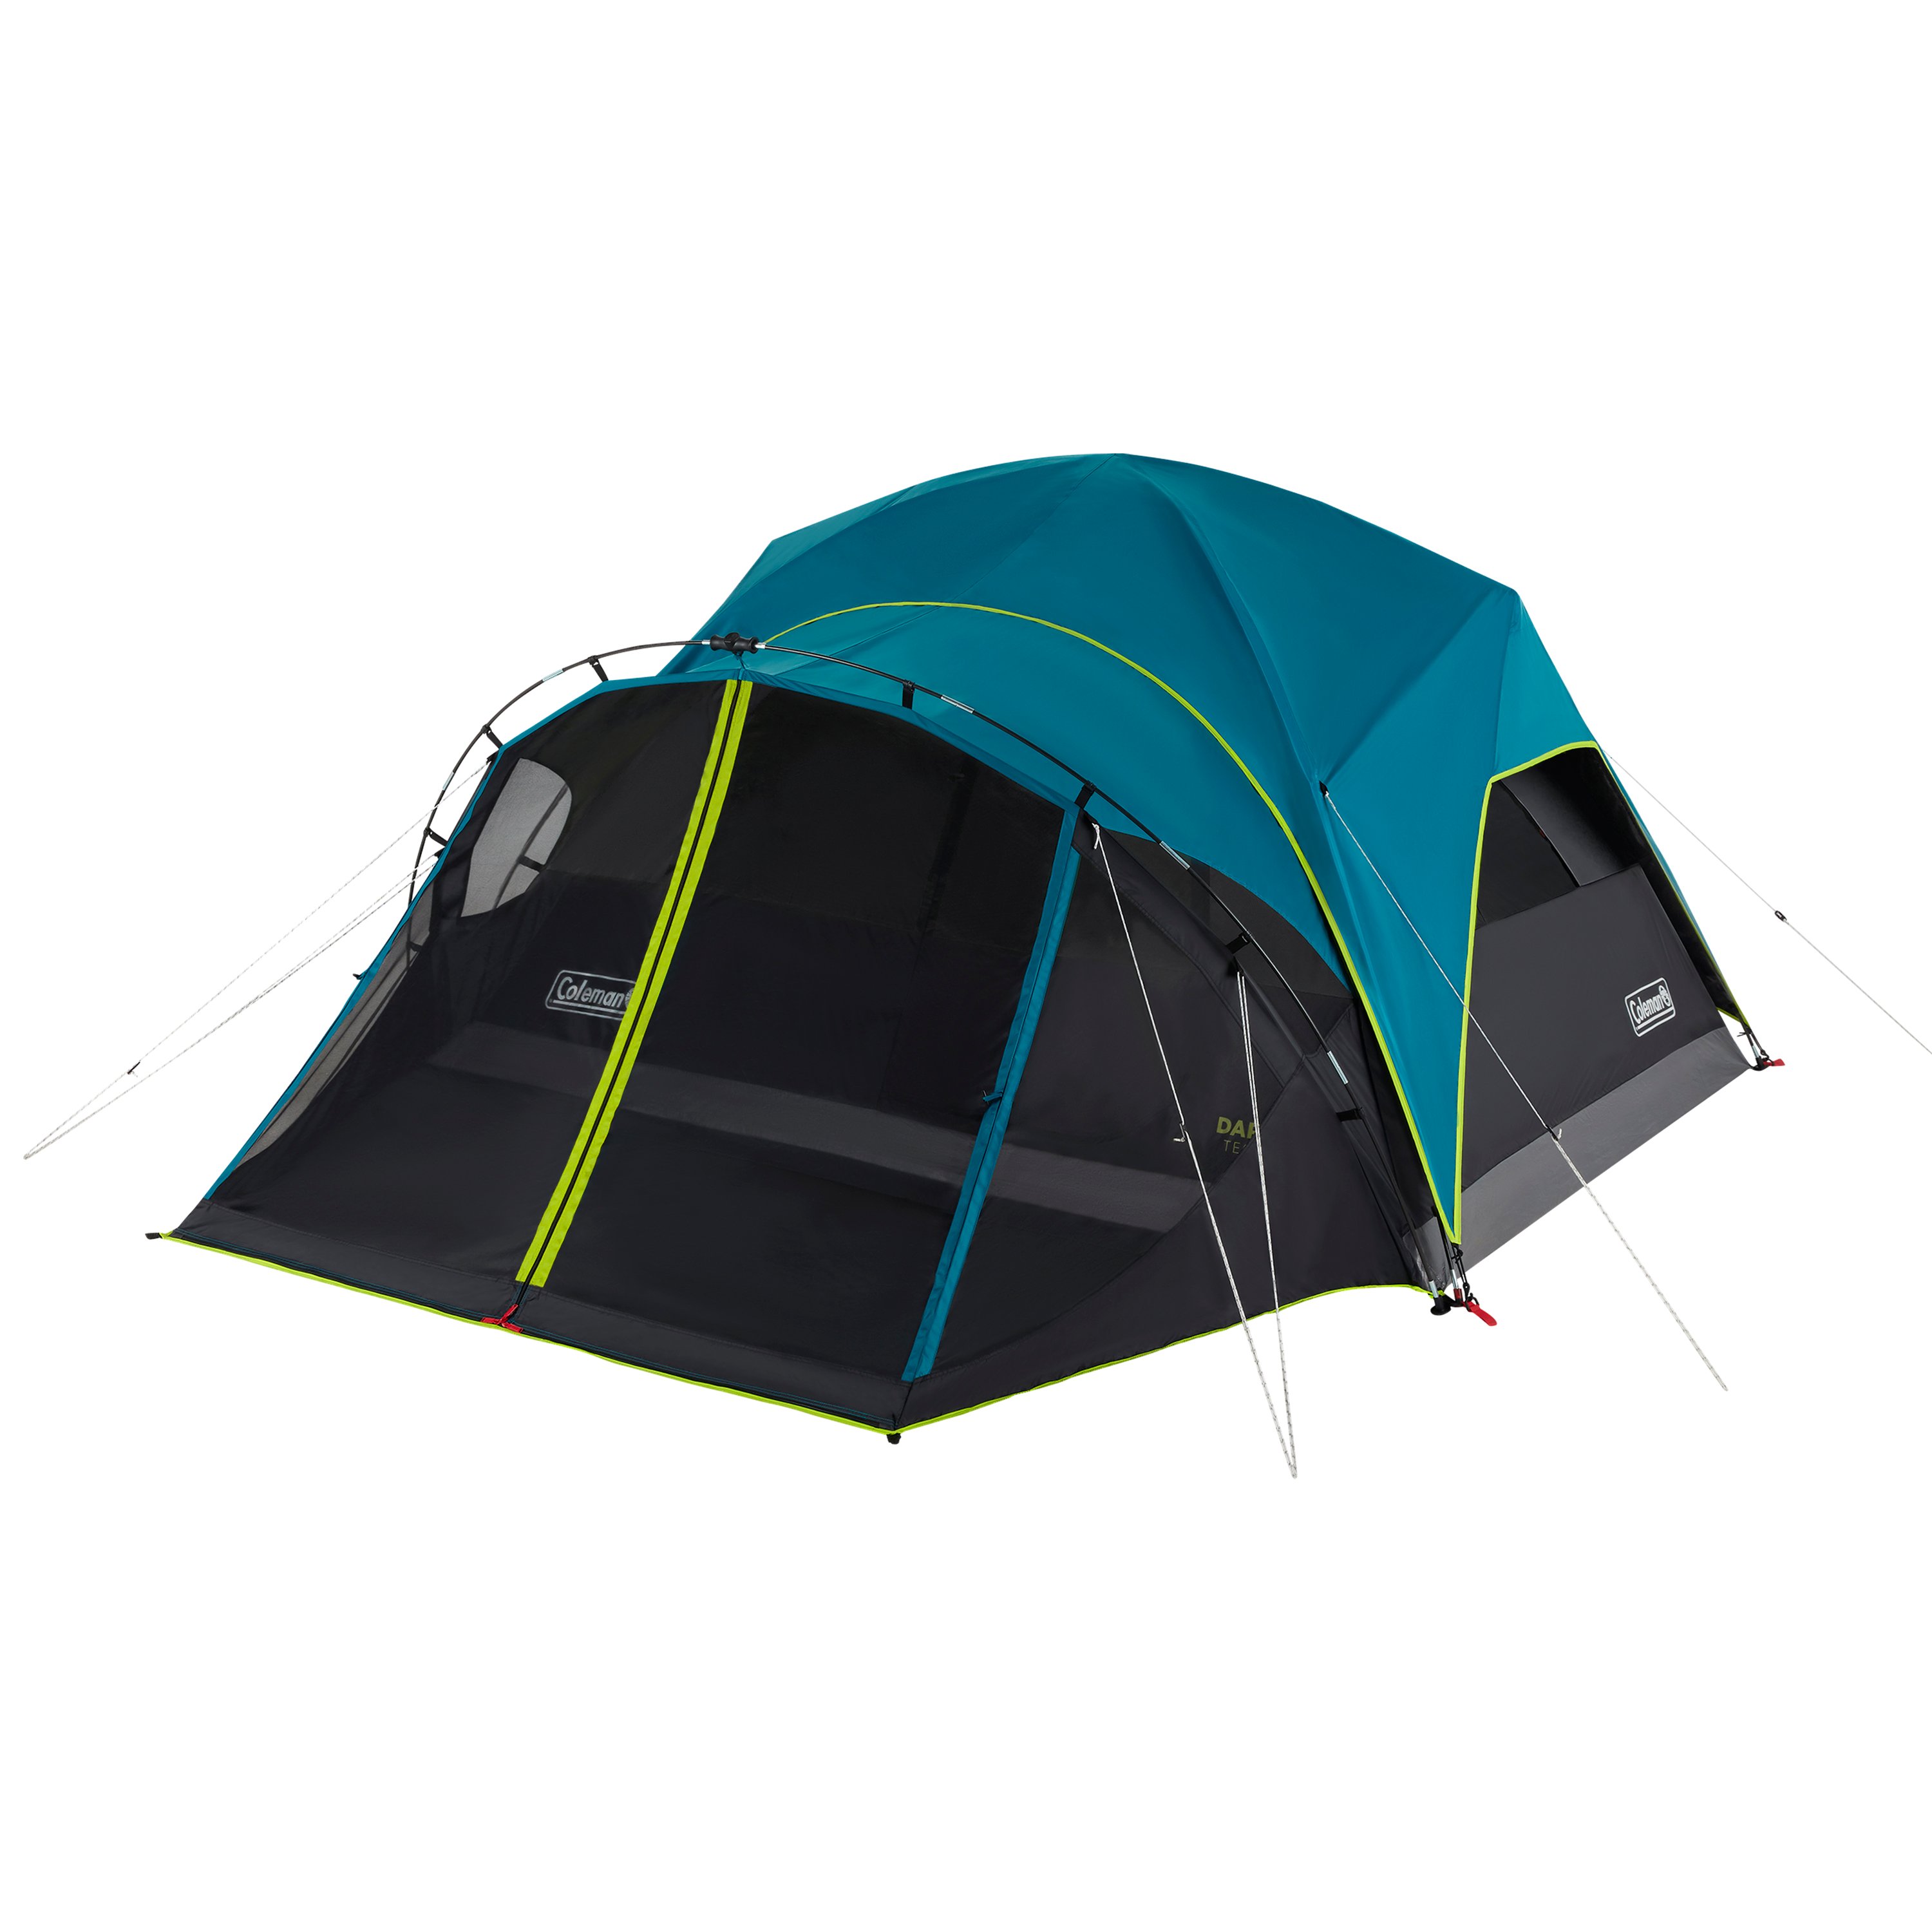 Coleman 4-Person Carlsbad Dark Room Dome Camping Tent with Screen Room - image 1 of 8